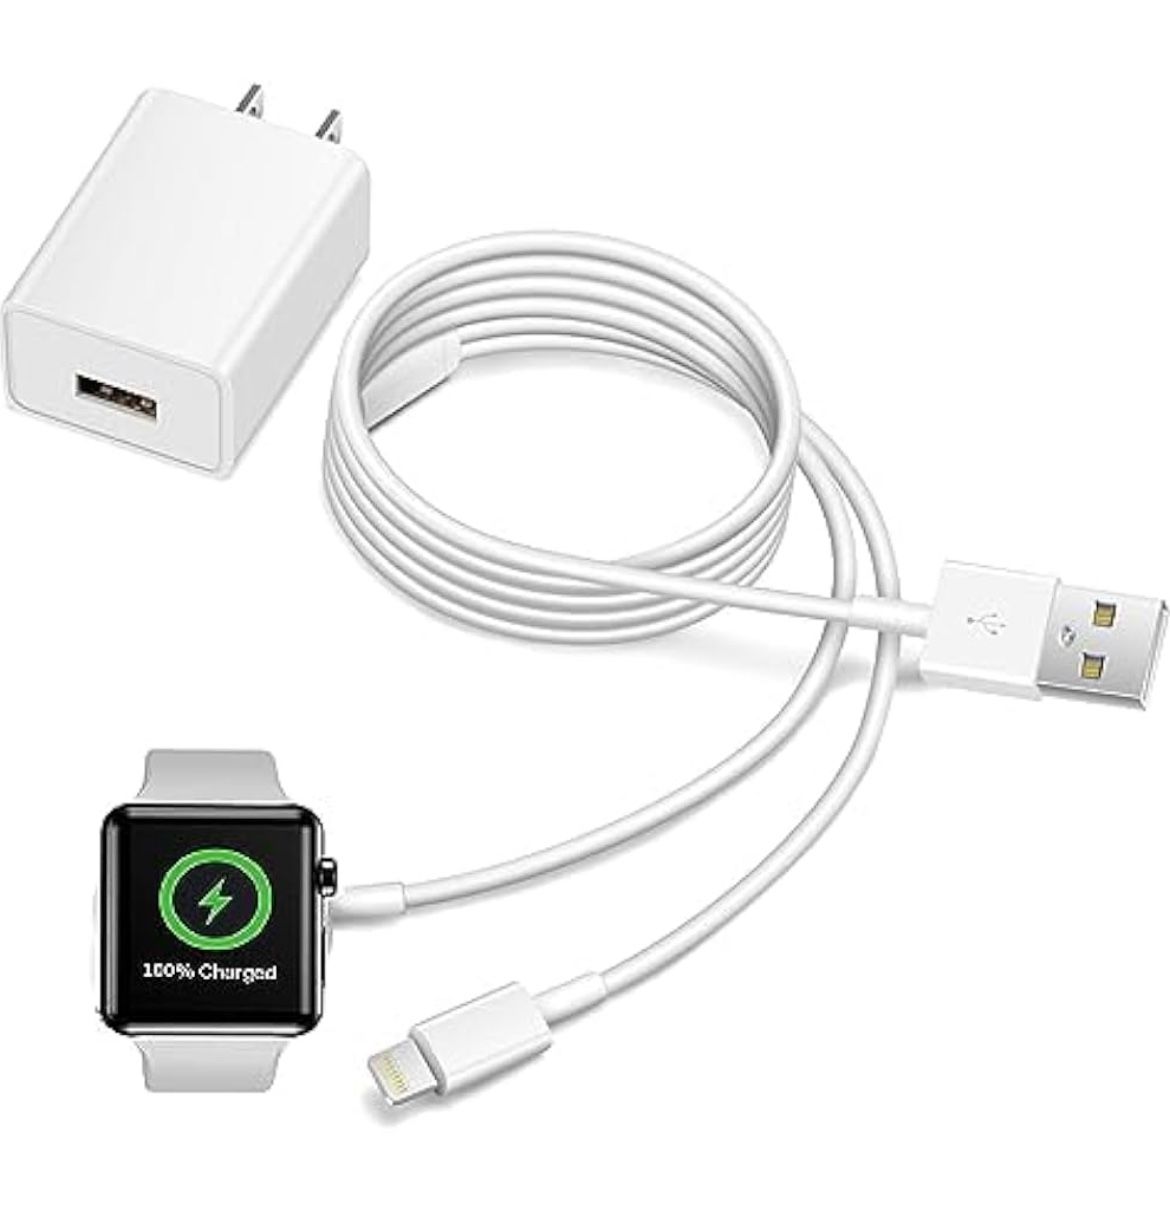 2in 1 Apple Charger